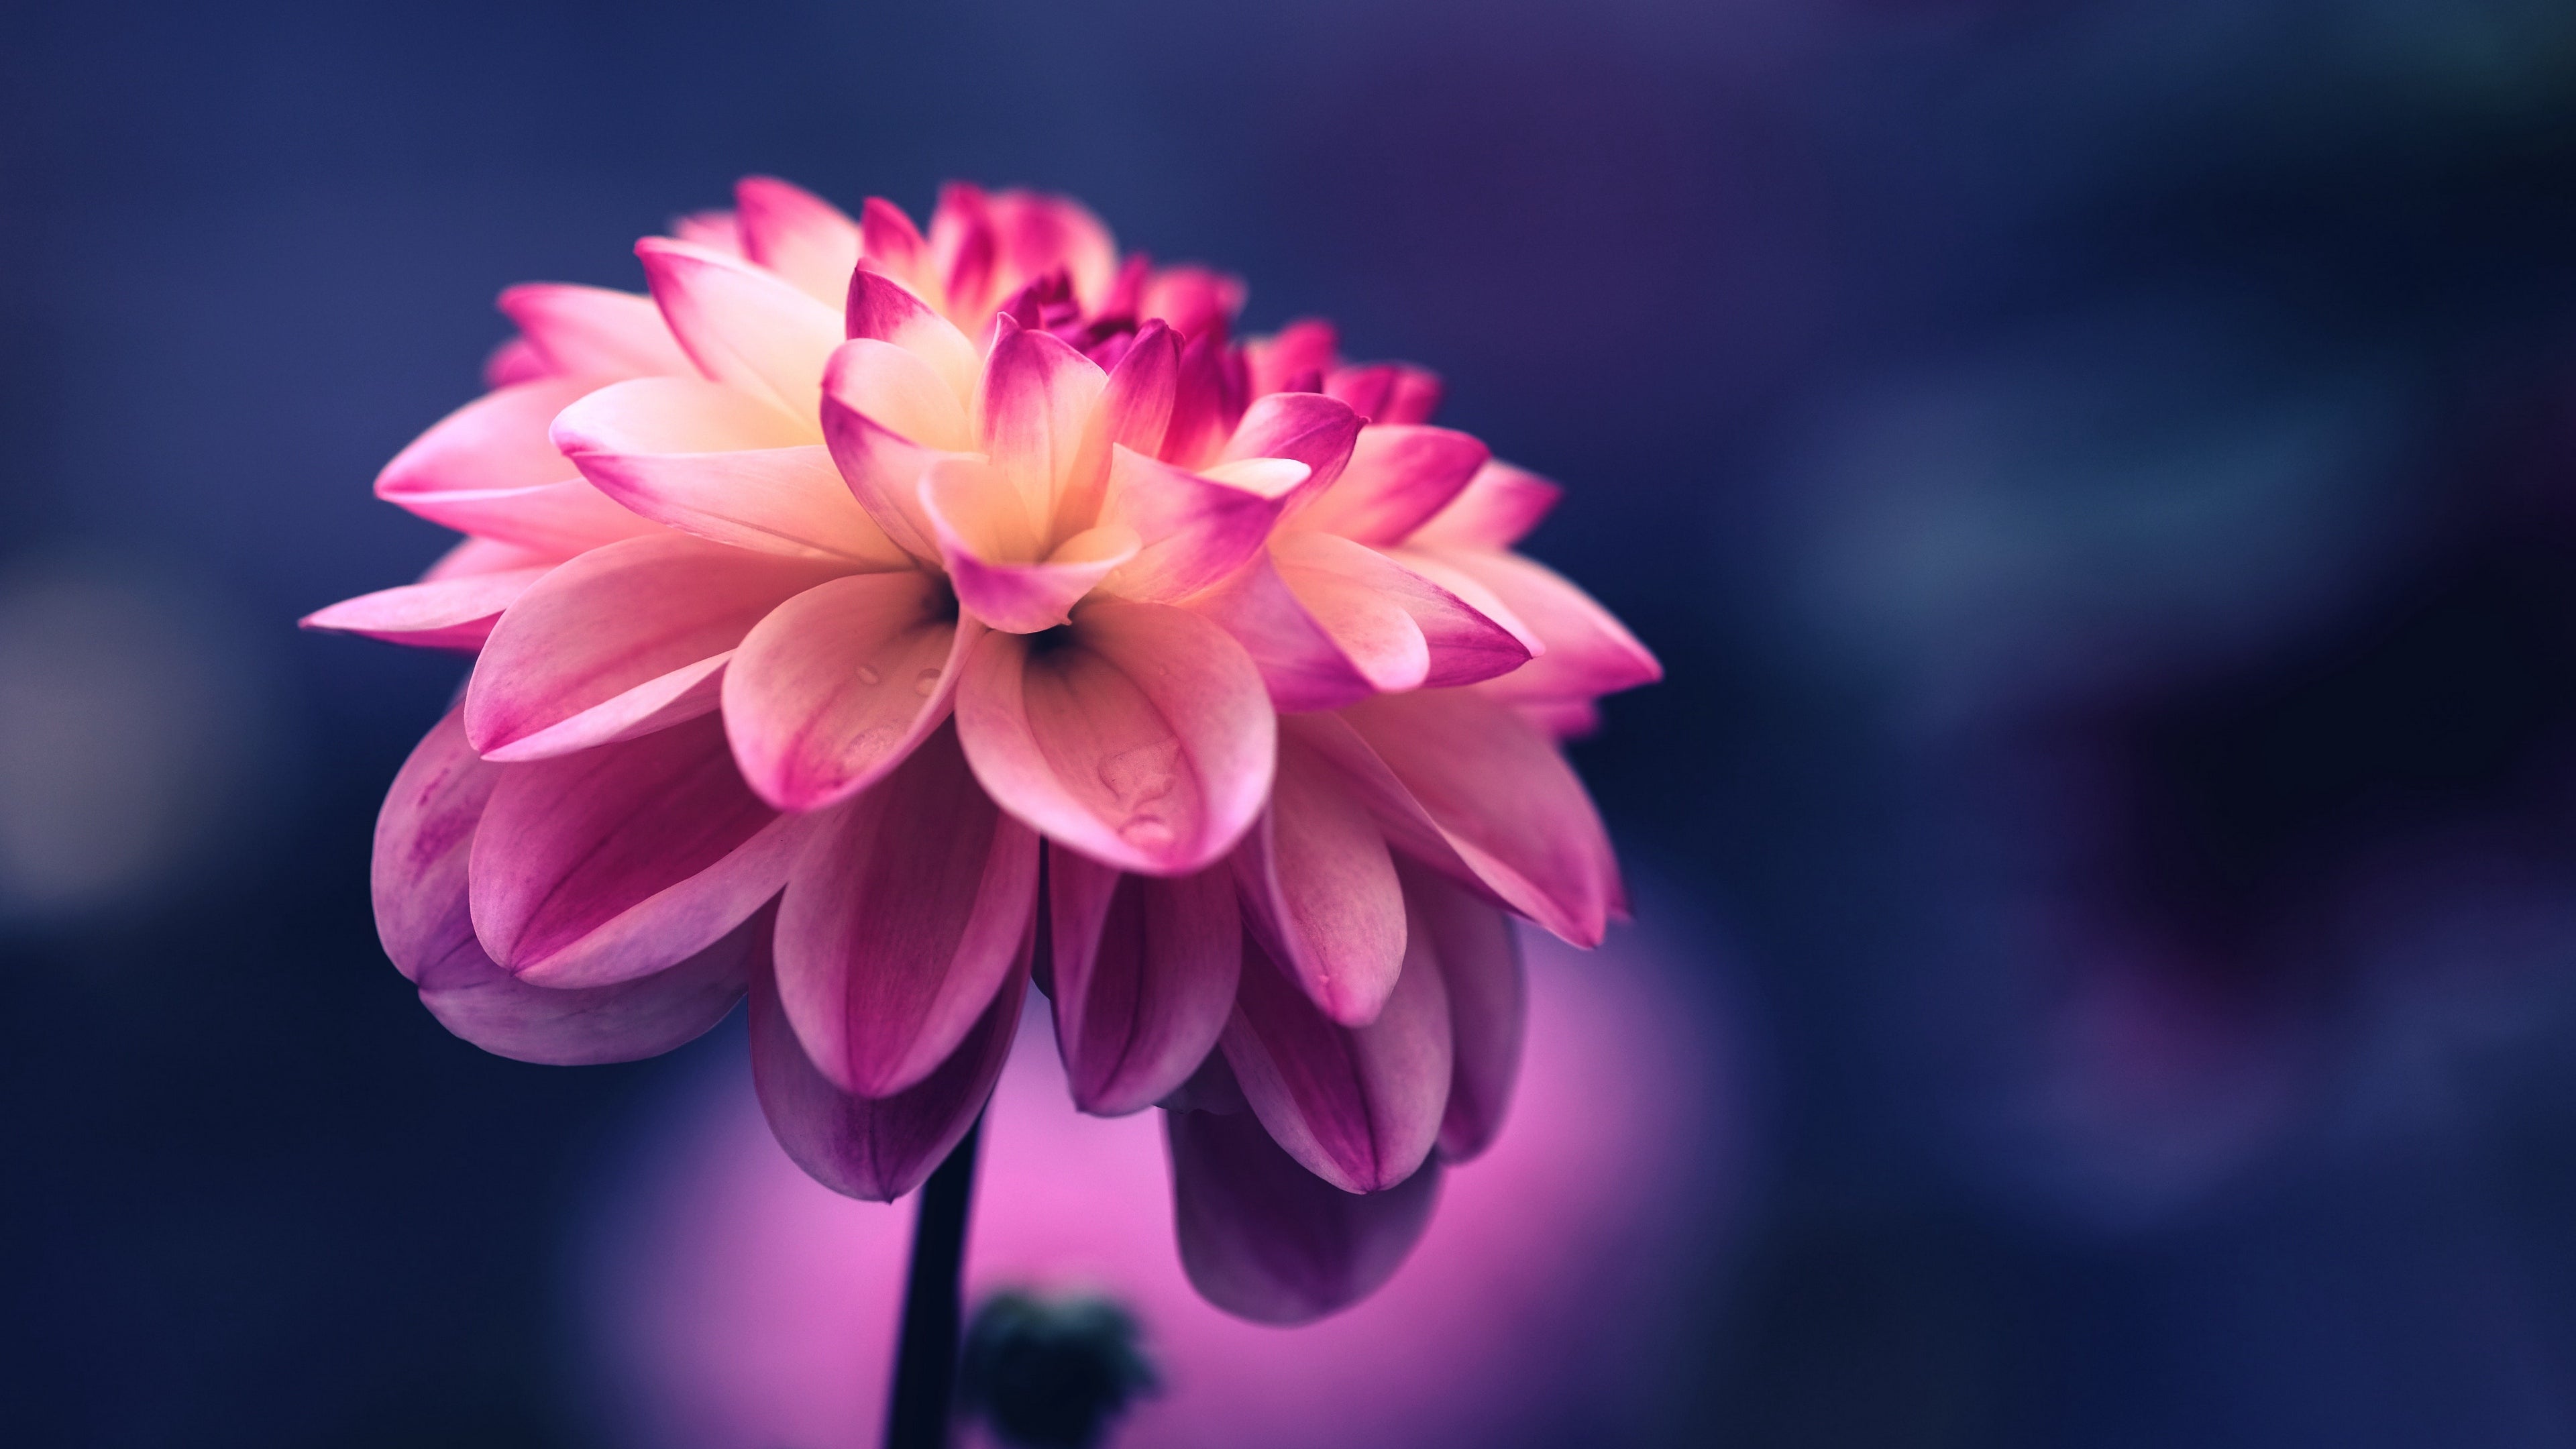 Page 2 of Flower 4K wallpapers for your desktop or mobile screen